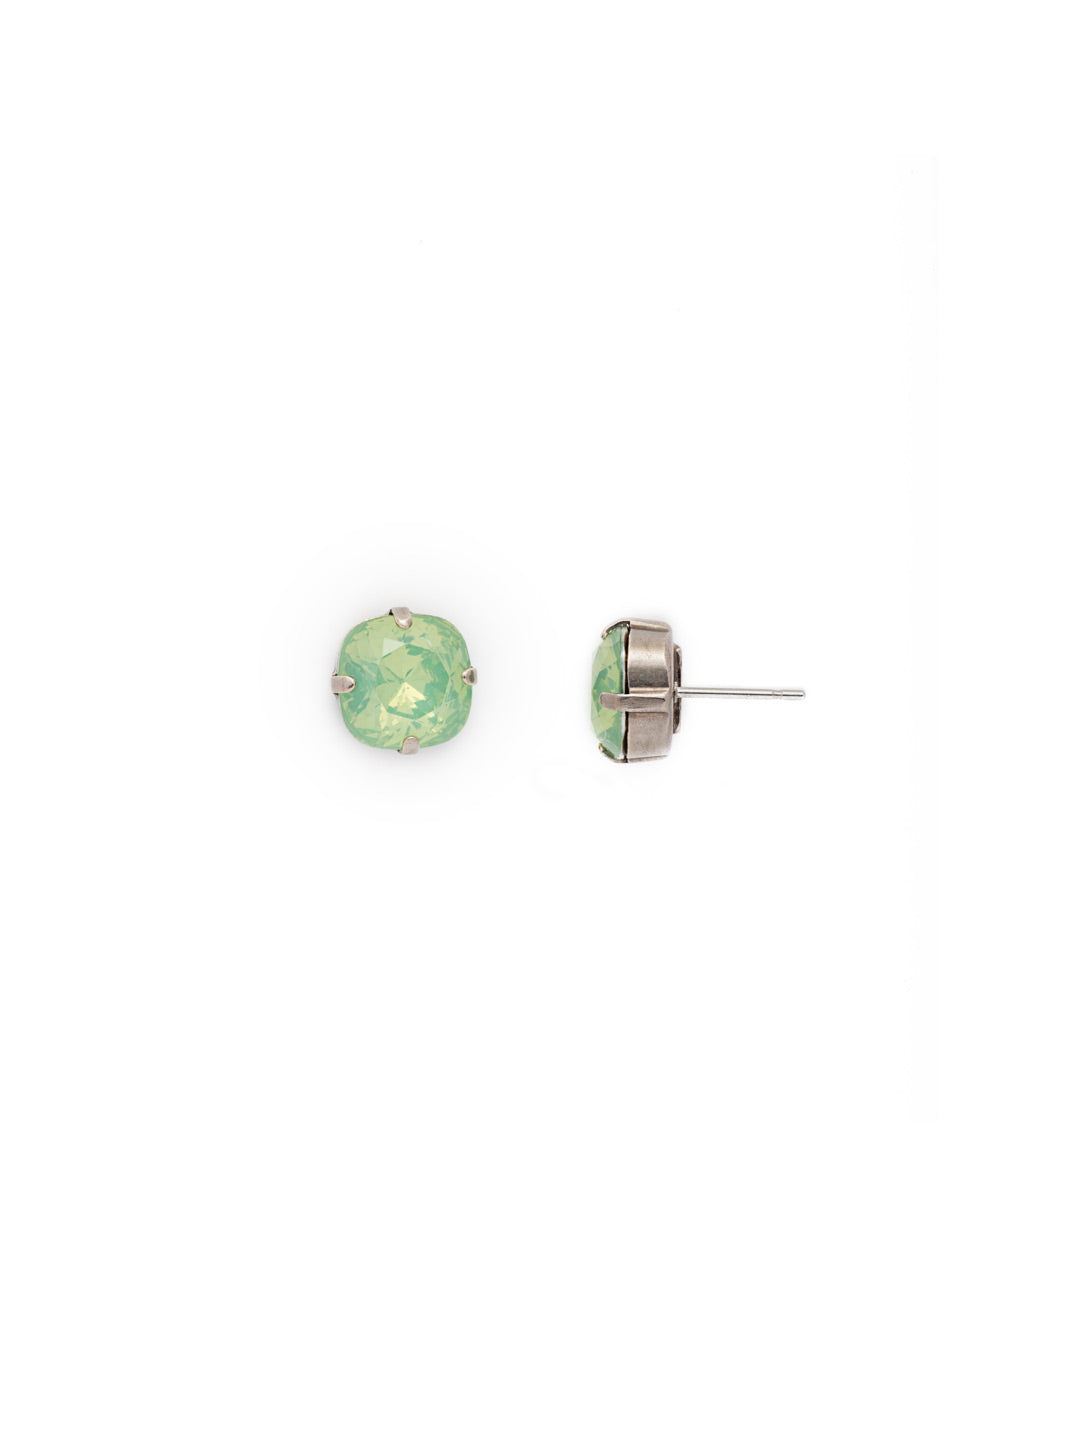 Halcyon Stud Earrings - EDH25ASPOP - <p>A beautiful, luminous cushion-cut crystal in a classic four-pronged setting that's ideal for everyday wear. From Sorrelli's Gem Pop collection in our Antique Silver-tone finish.</p>